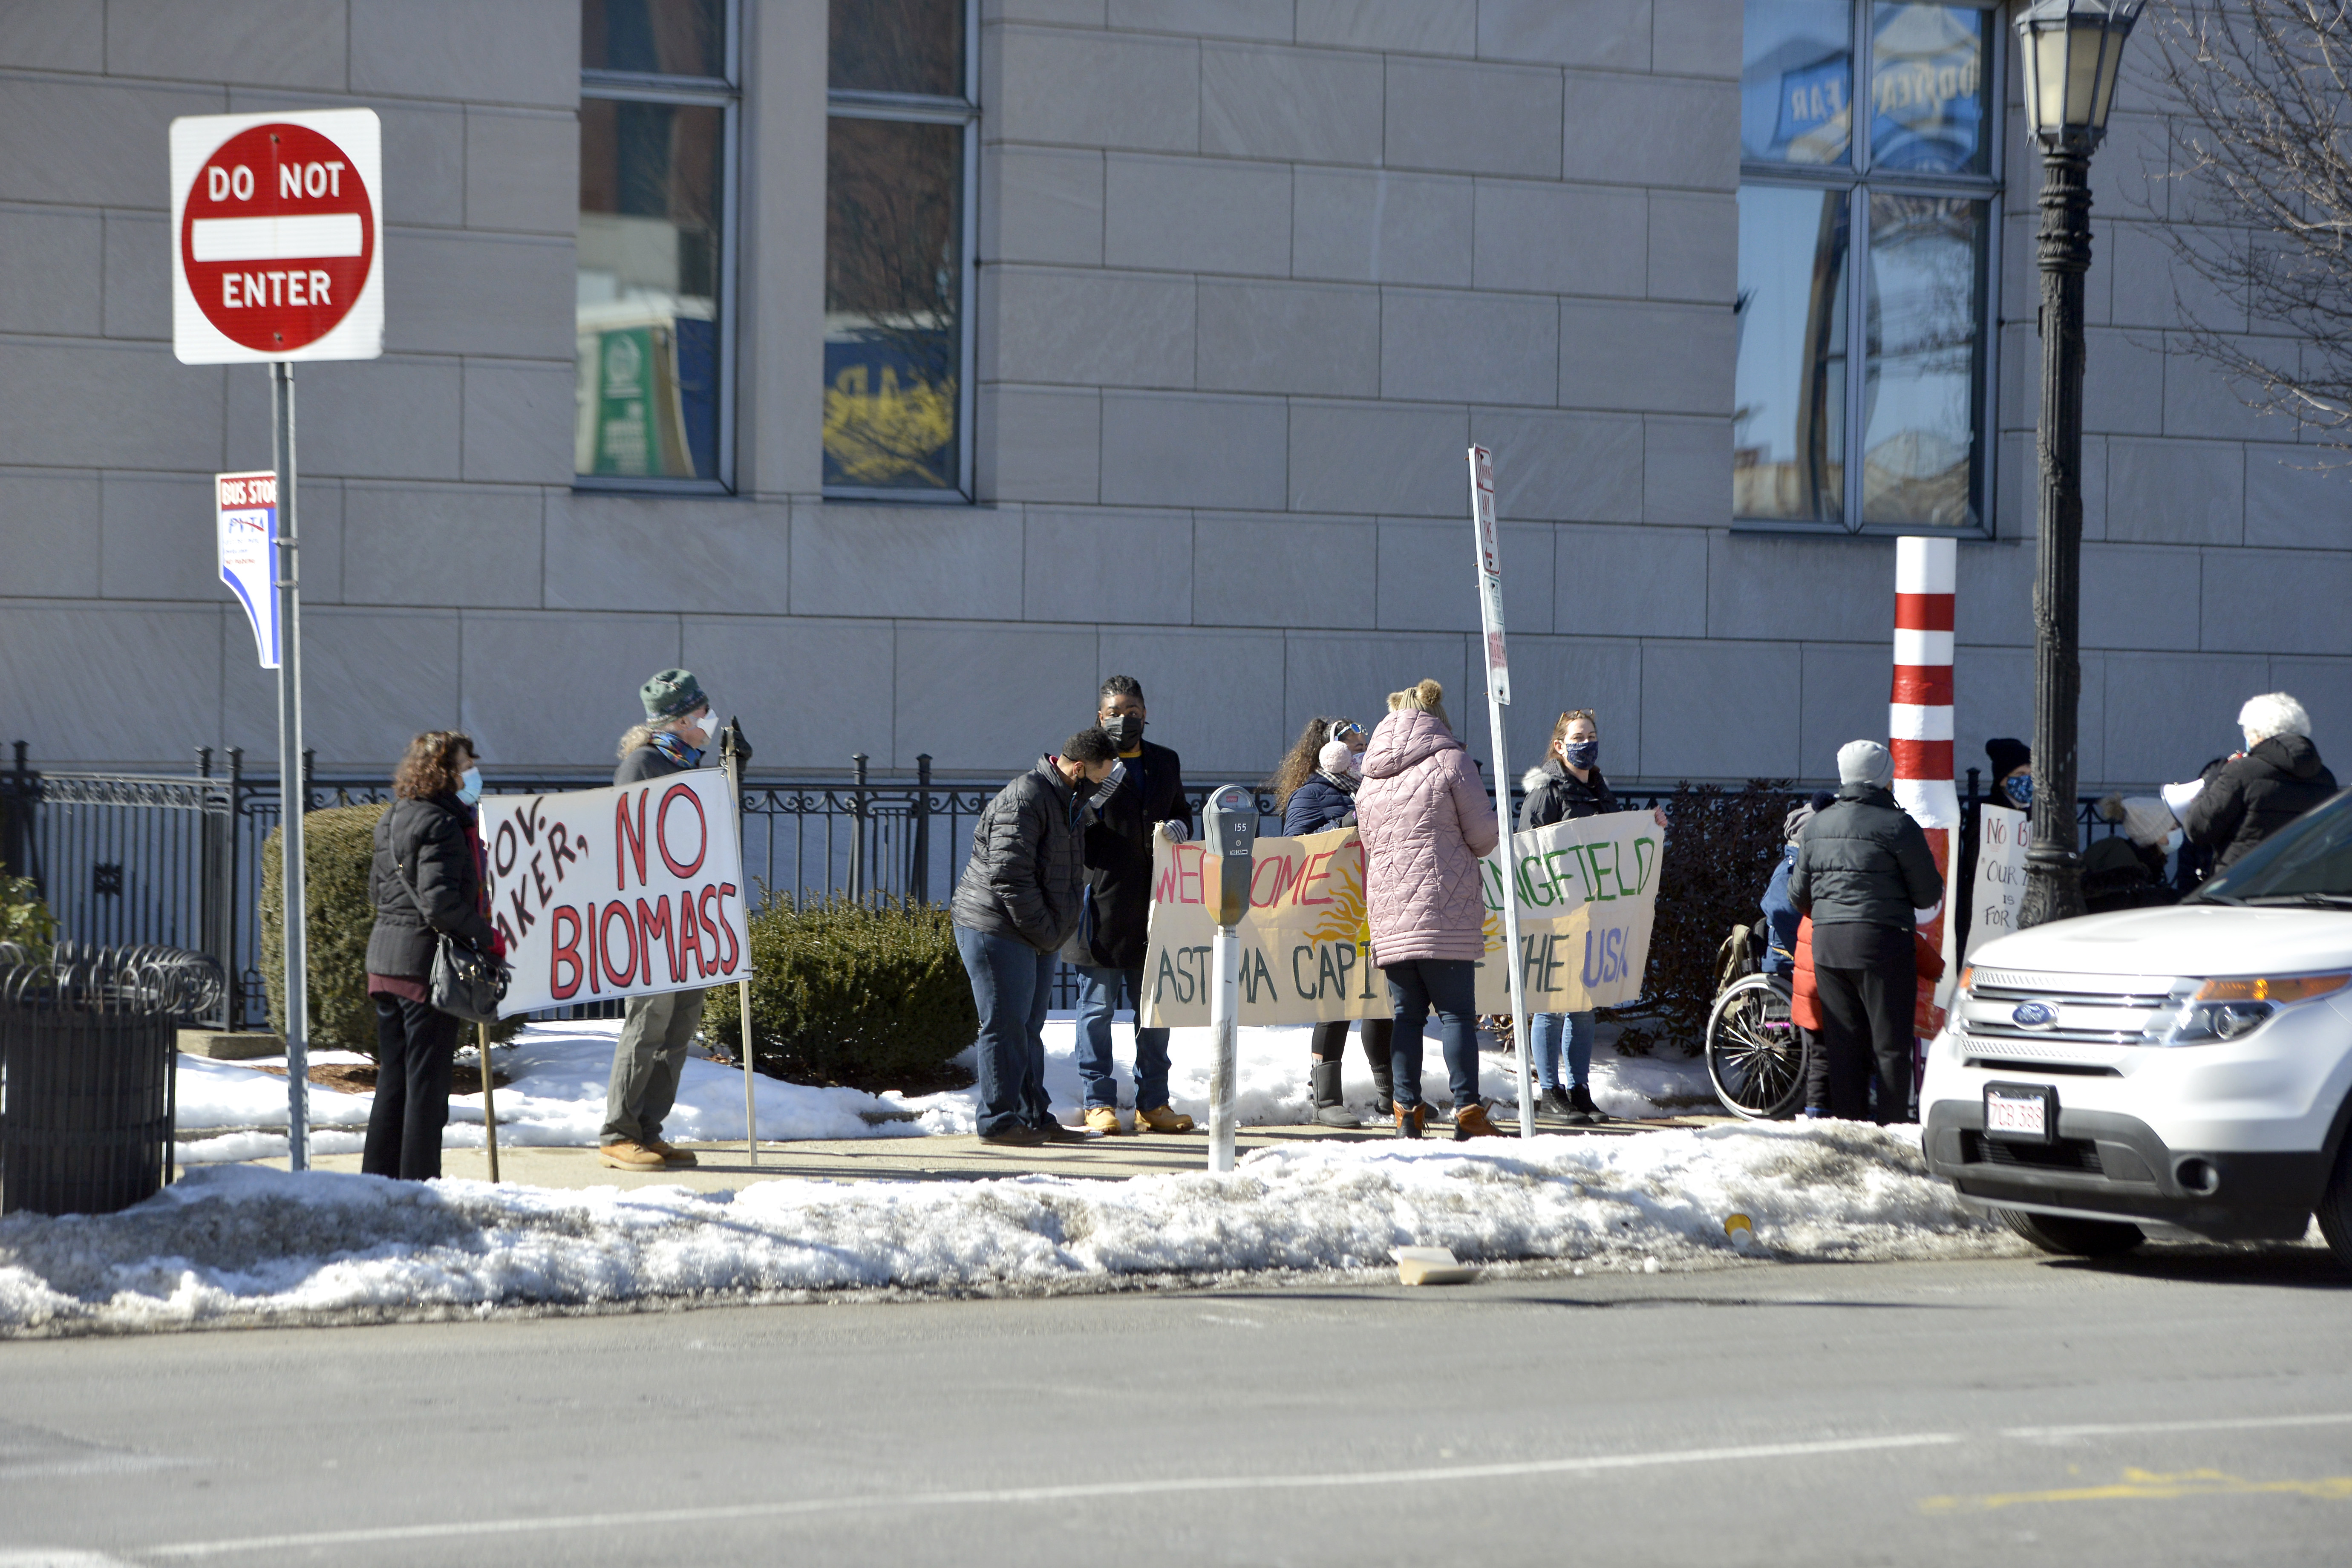 Demonstrators line the sidewalk outside the Western Massachusetts office of Governor Charlie Baker in Springfield to demand an end to the long proposed biomass energy plant in East Springfield on Feb. 17, 2021.   (Don Treeger / The Republican)